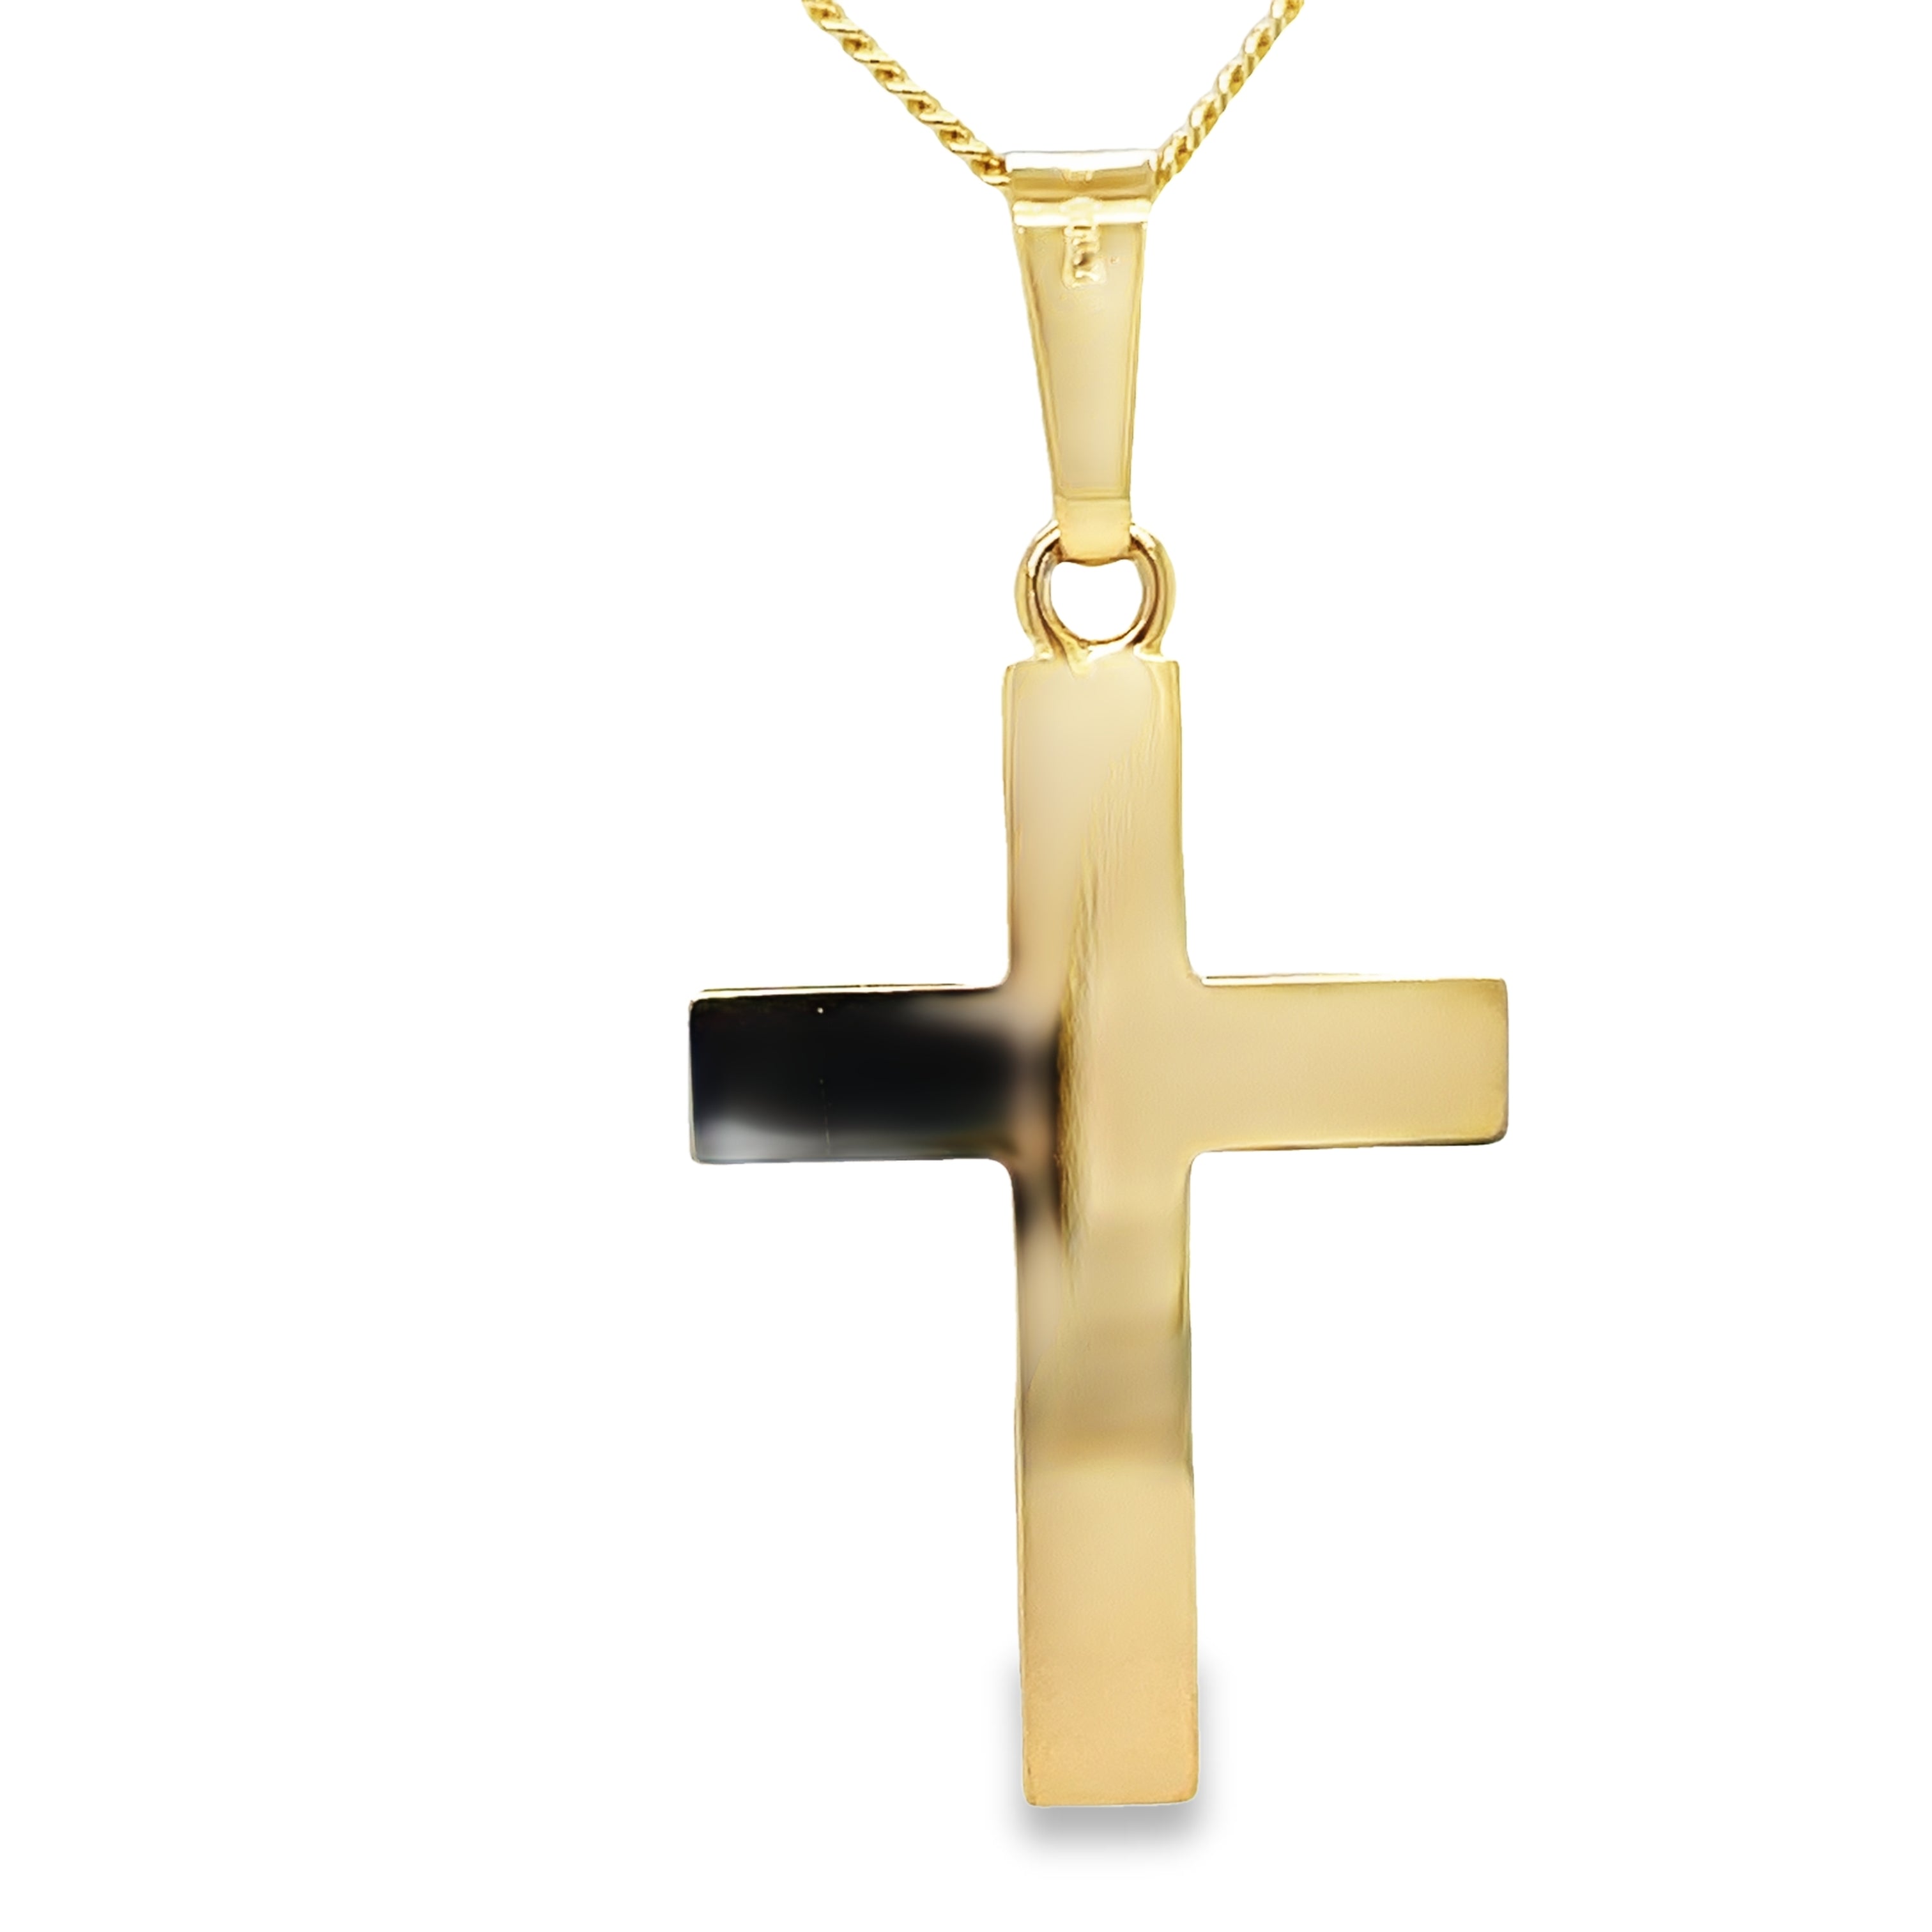 Crafted with expertise in Italy, this 14kt yellow gold cross showcases timeless elegance. The 14 karat yellow gold shines radiantly, while the optional ($599) 14 karat yellow gold chain 1.5" long complements the intricate design. At one inch long, this cross is the perfect addition to any jewelry collection.